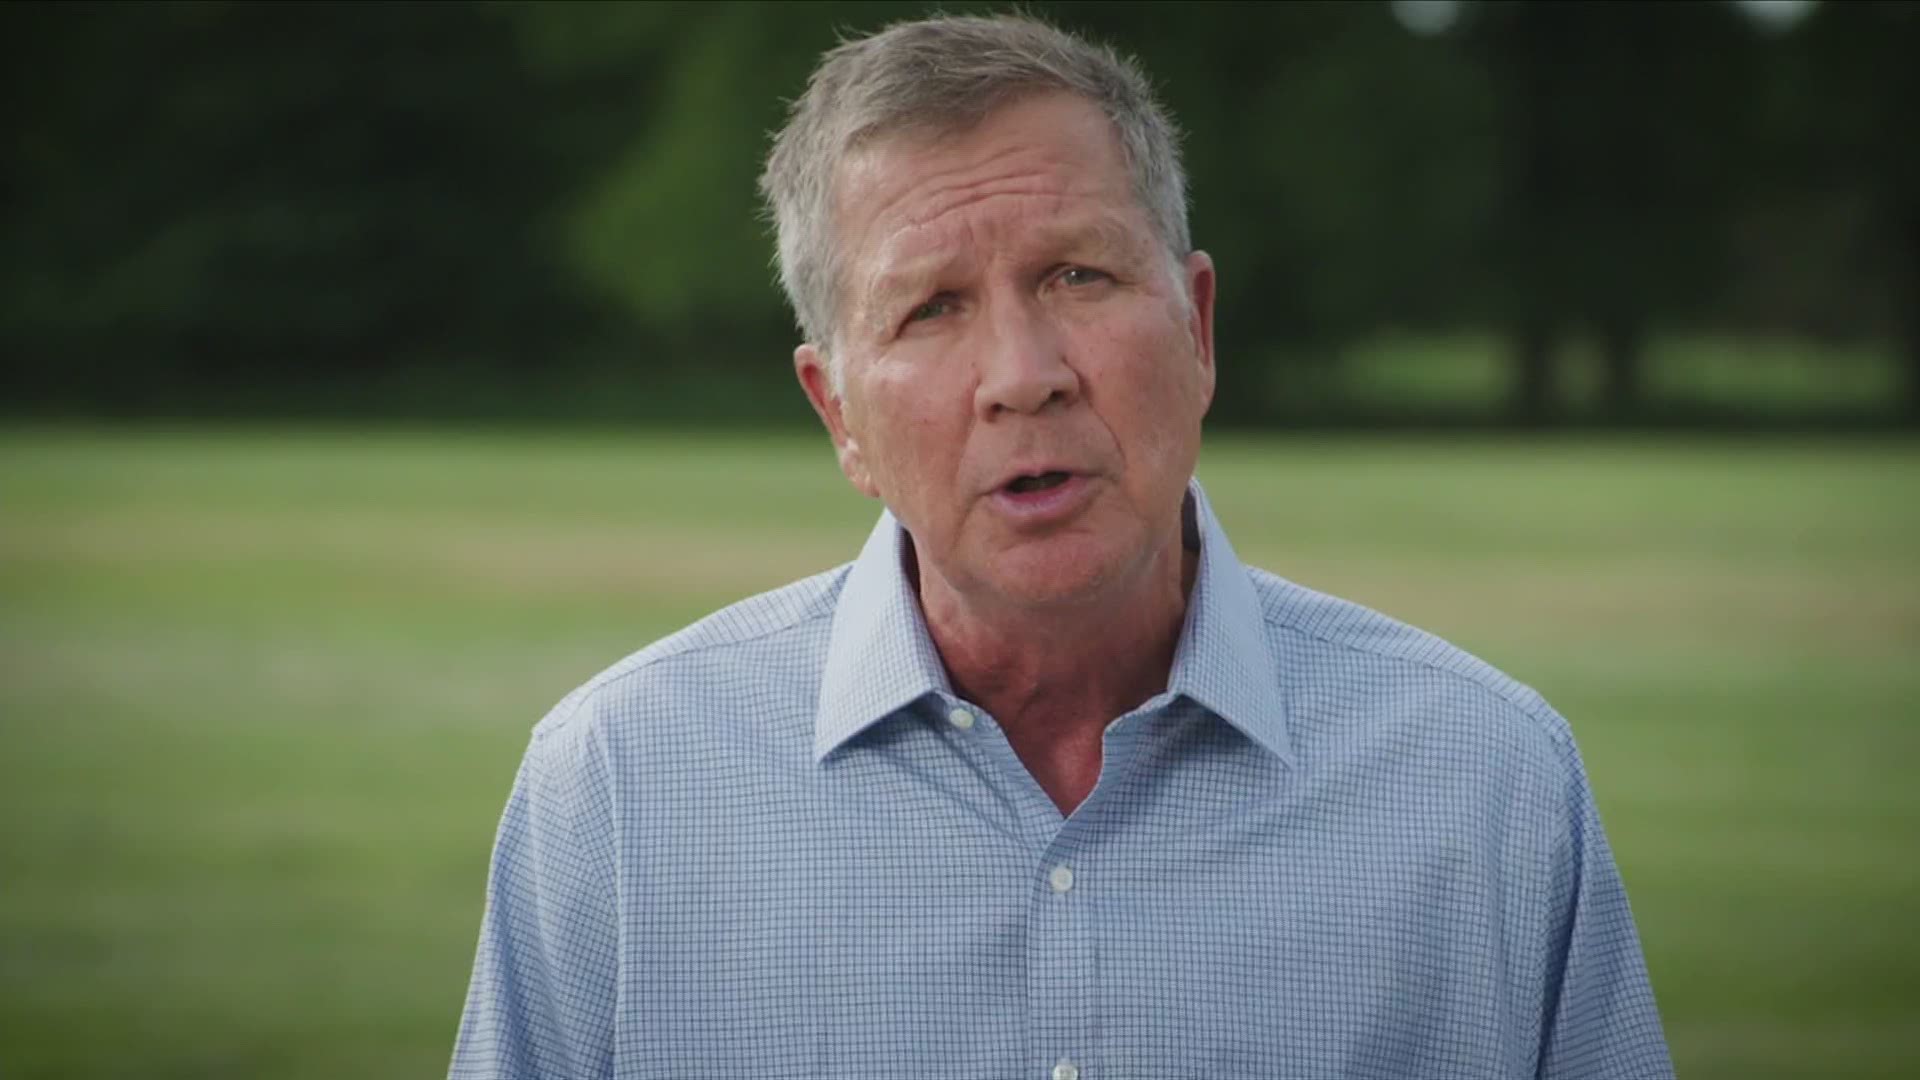 Four lifelong Republicans, including former Ohio Gov. John Kasich, criticized President Donald Trump Monday and explained why they support Joe Biden for president.